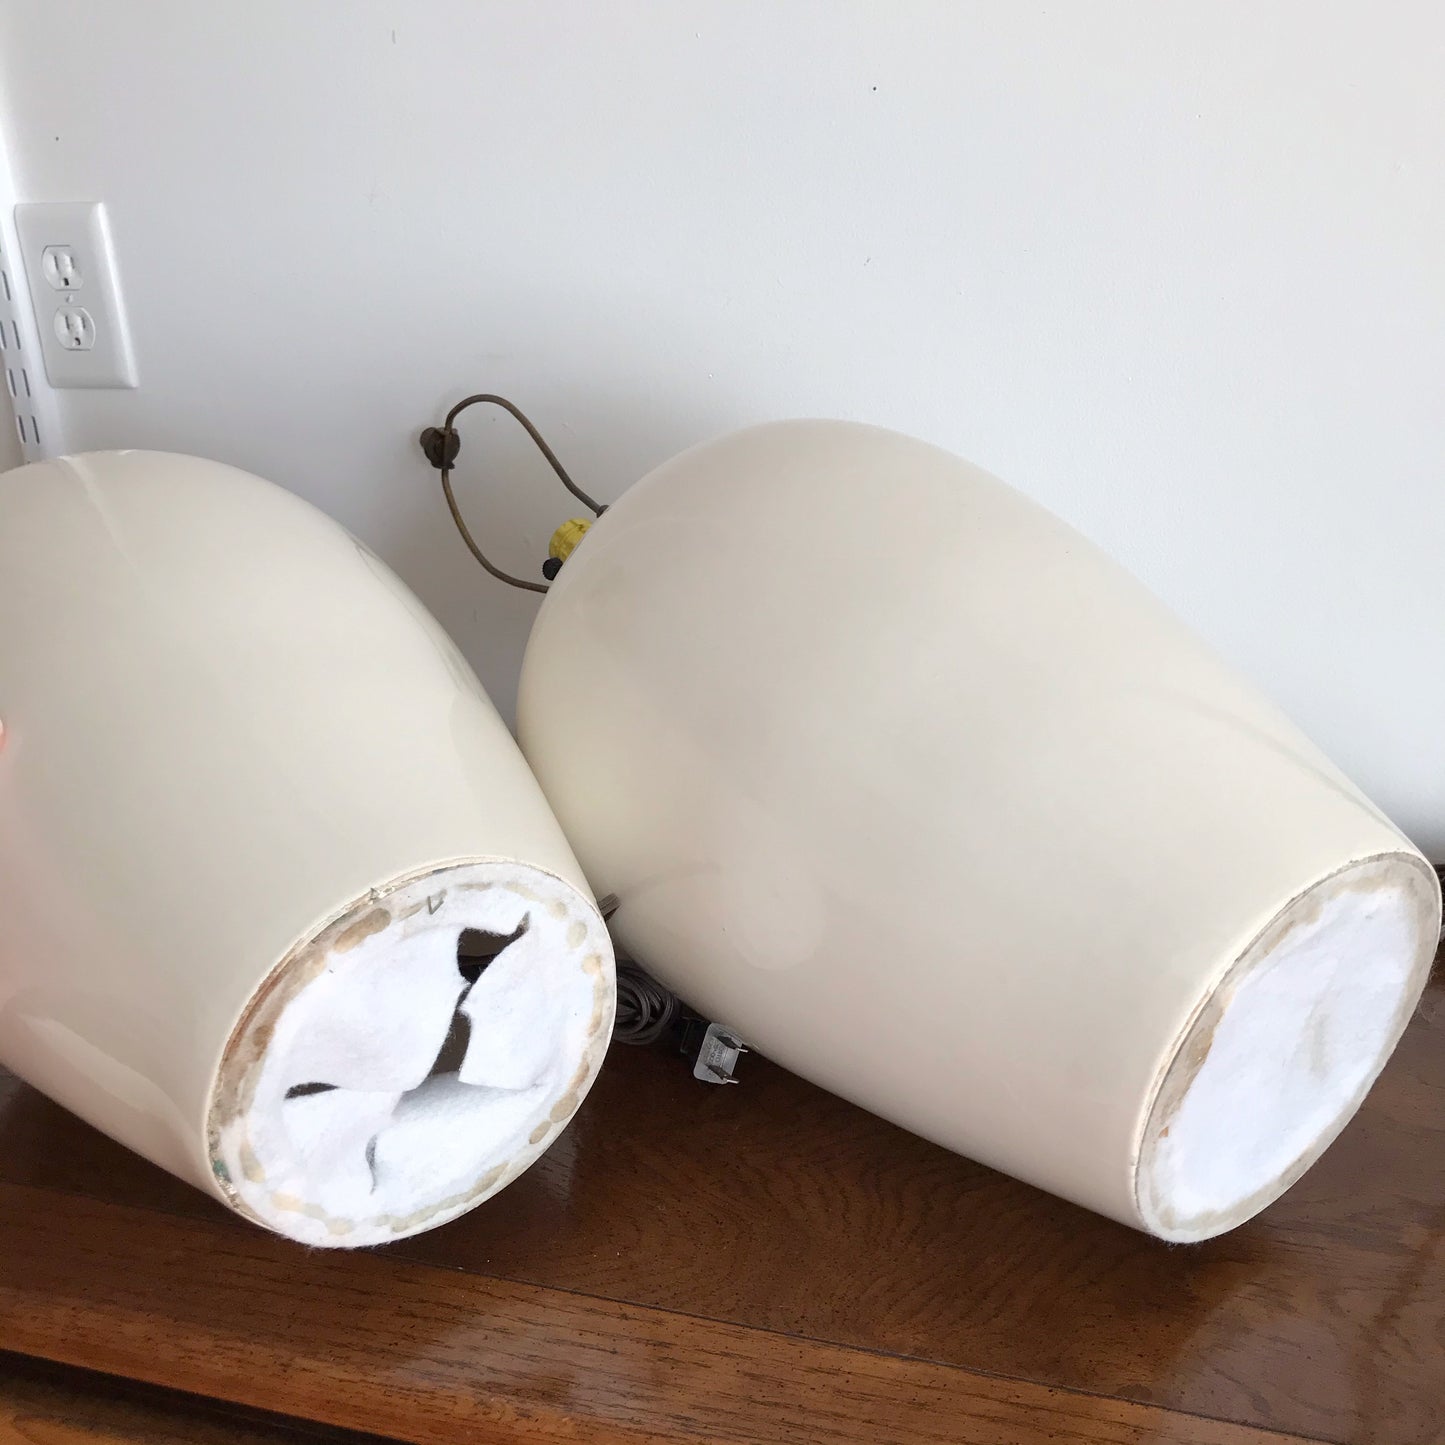 PAIR of XL Vintage Ceramic Lamps with Pleated Shades